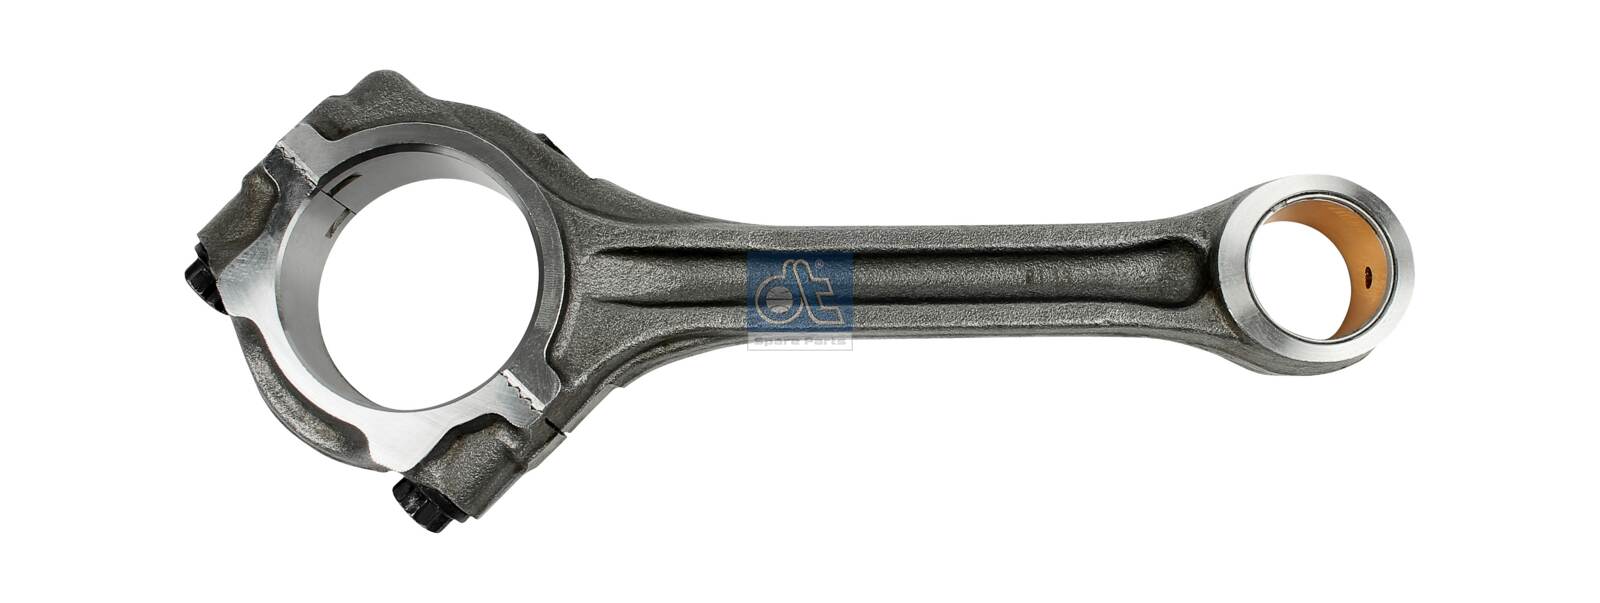 Connecting Rod - 4.61112 DT Spare Parts - 3520301220, 3520301420, 3520302720